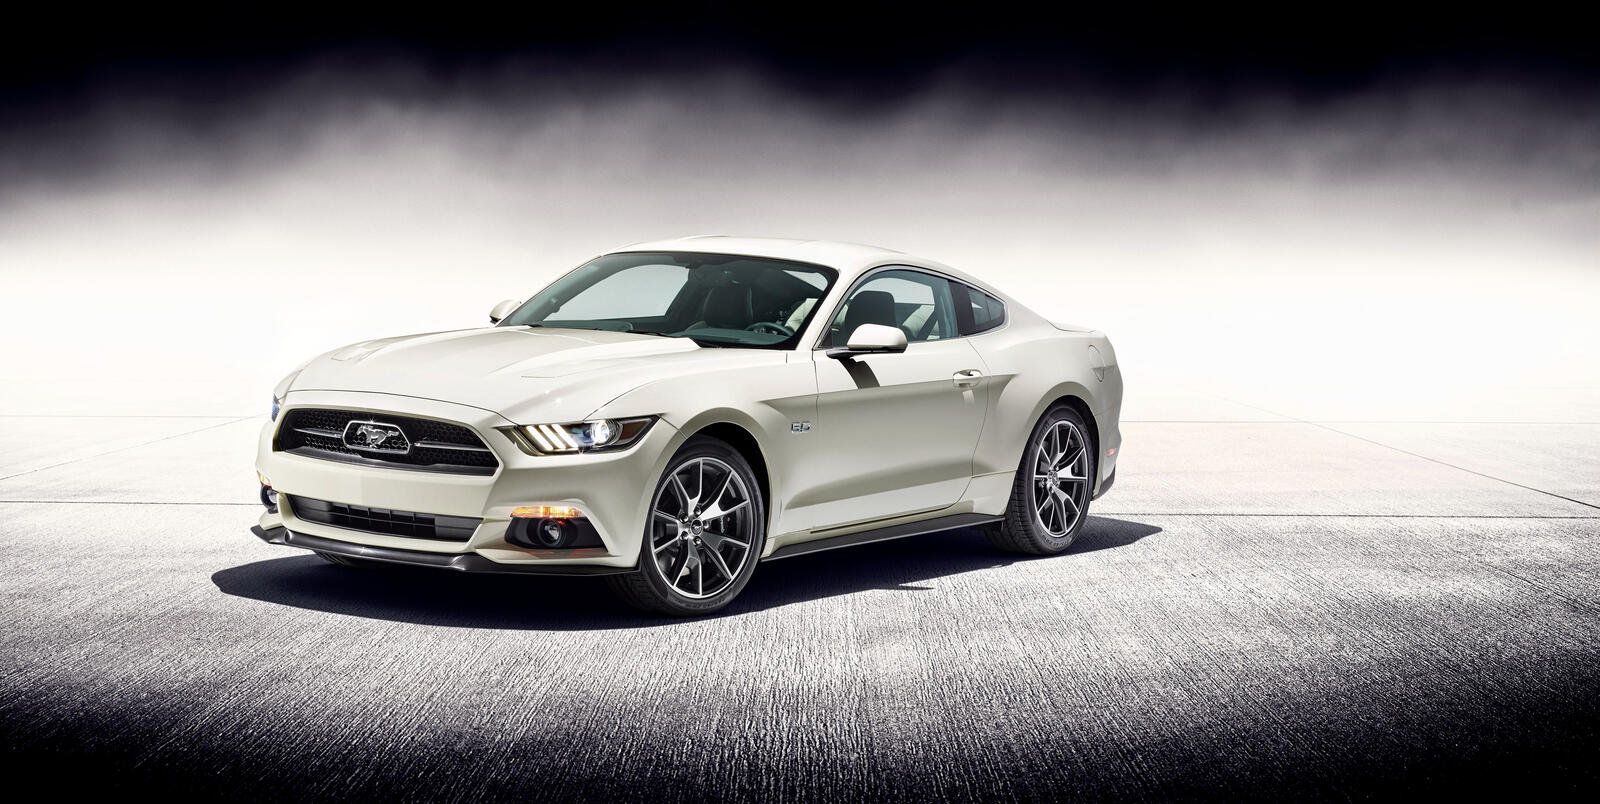 Wallpapers Ford Mustang Mustang cars on the desktop